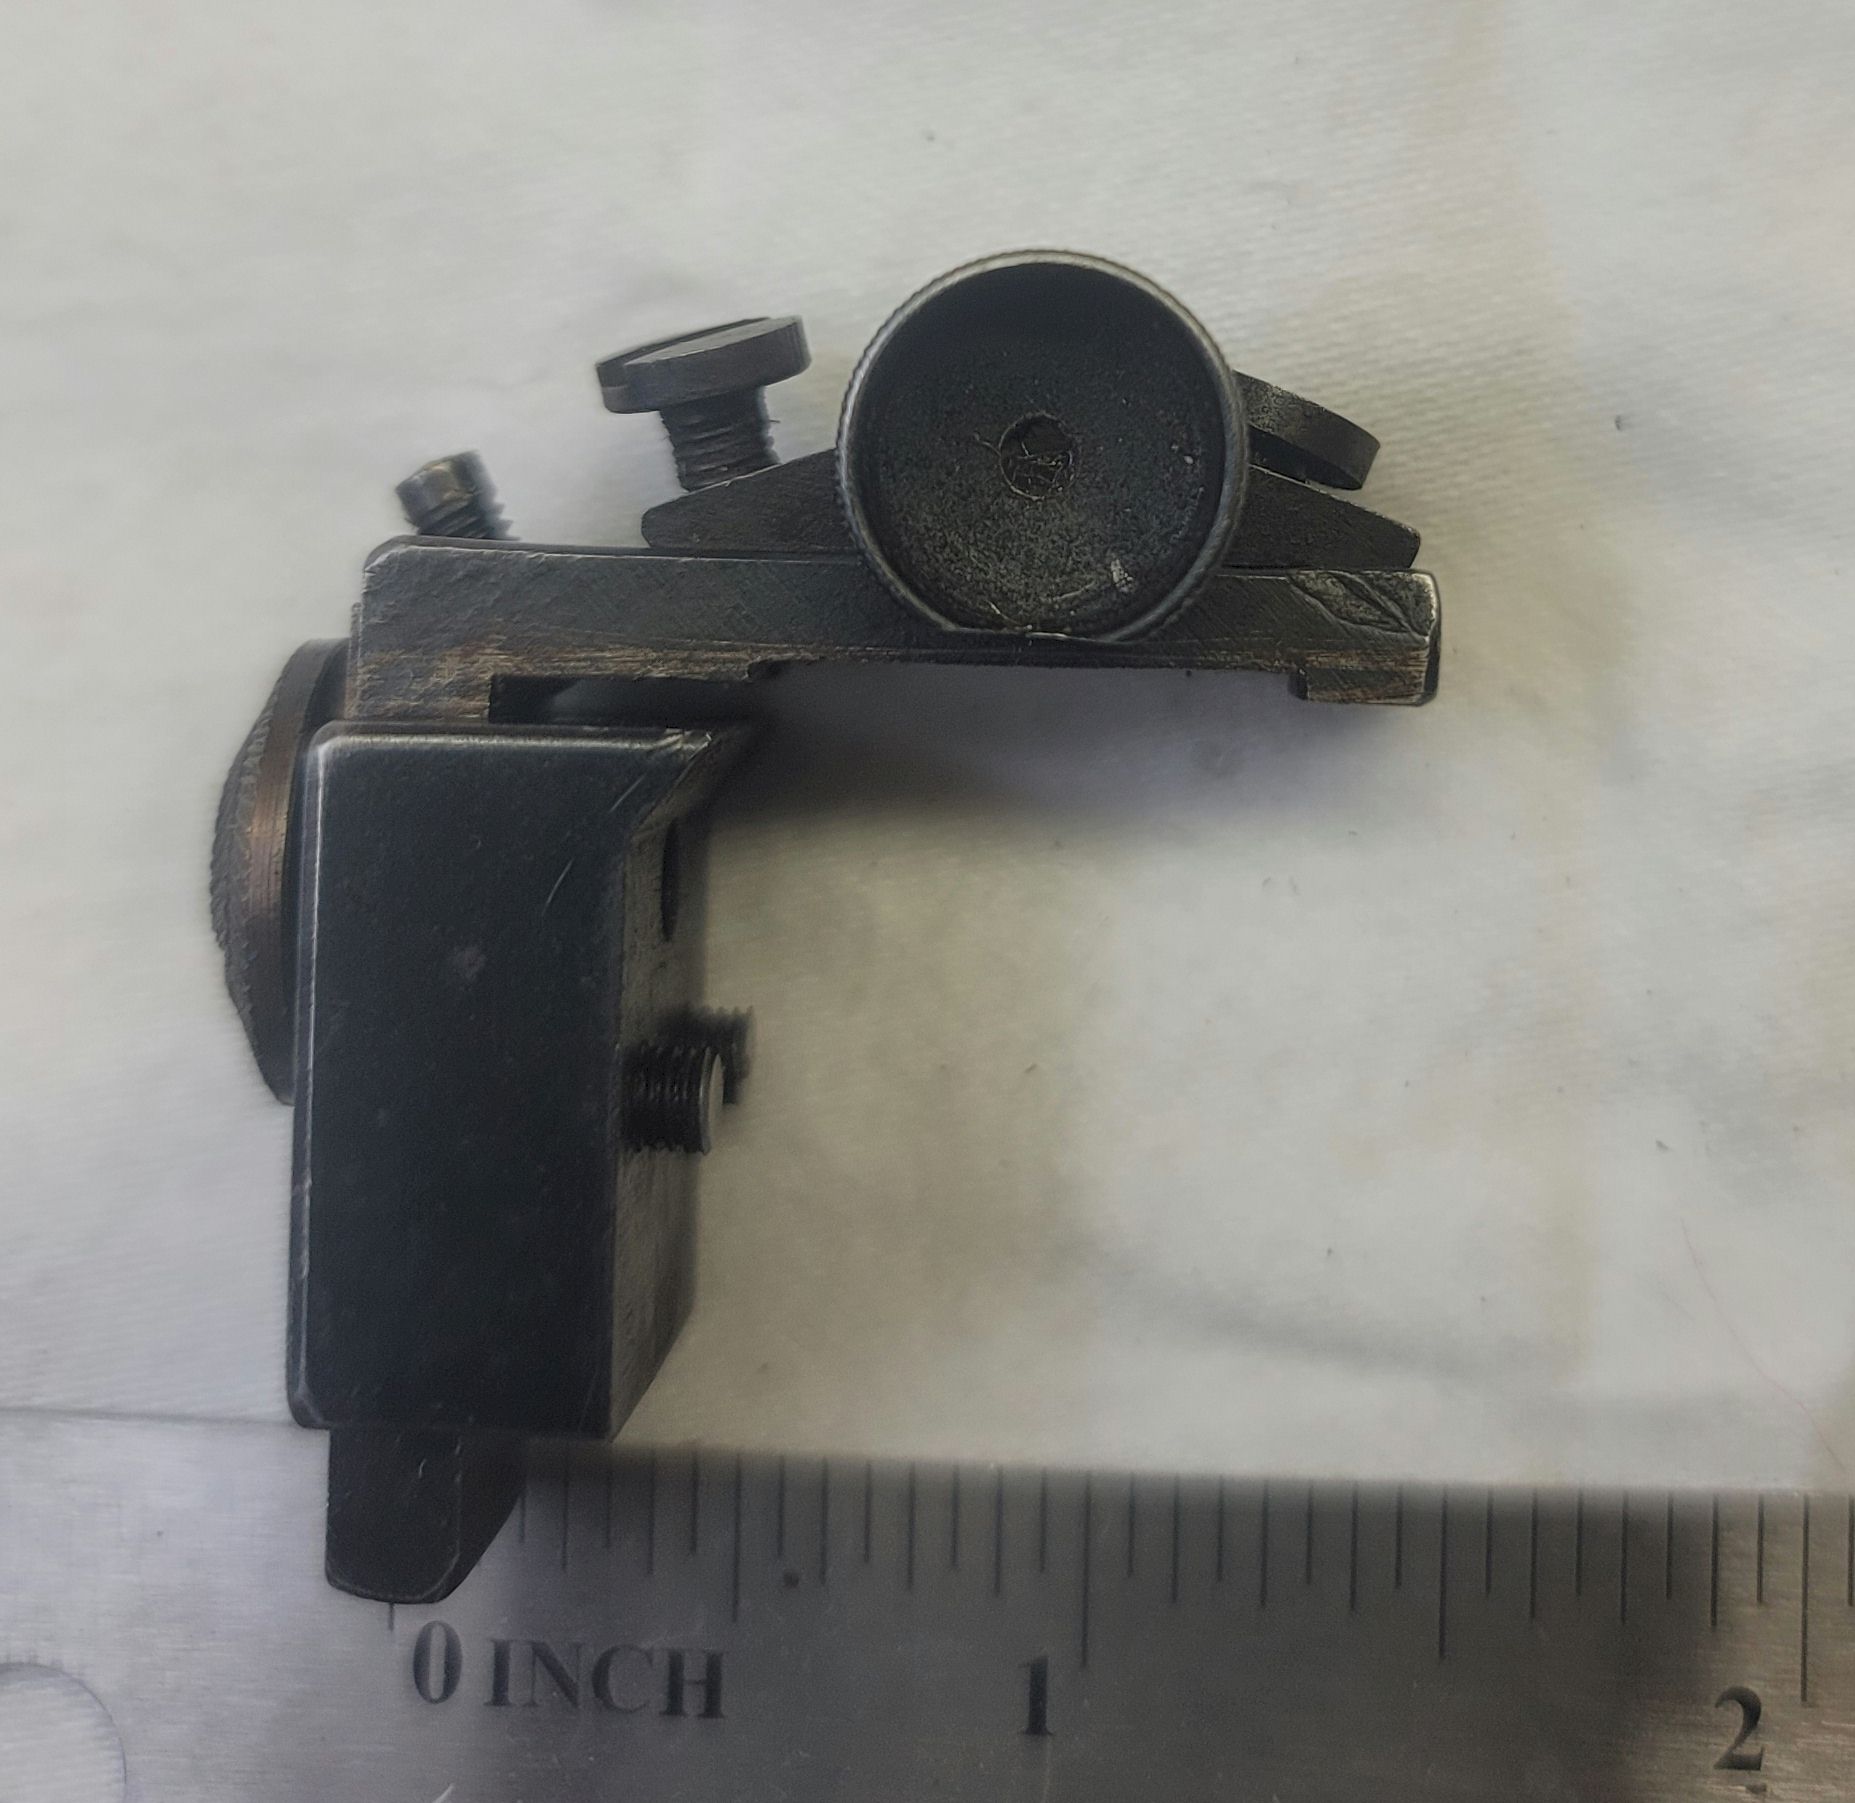 Sight - Rear Redfield No. 102 for Winchester rifles